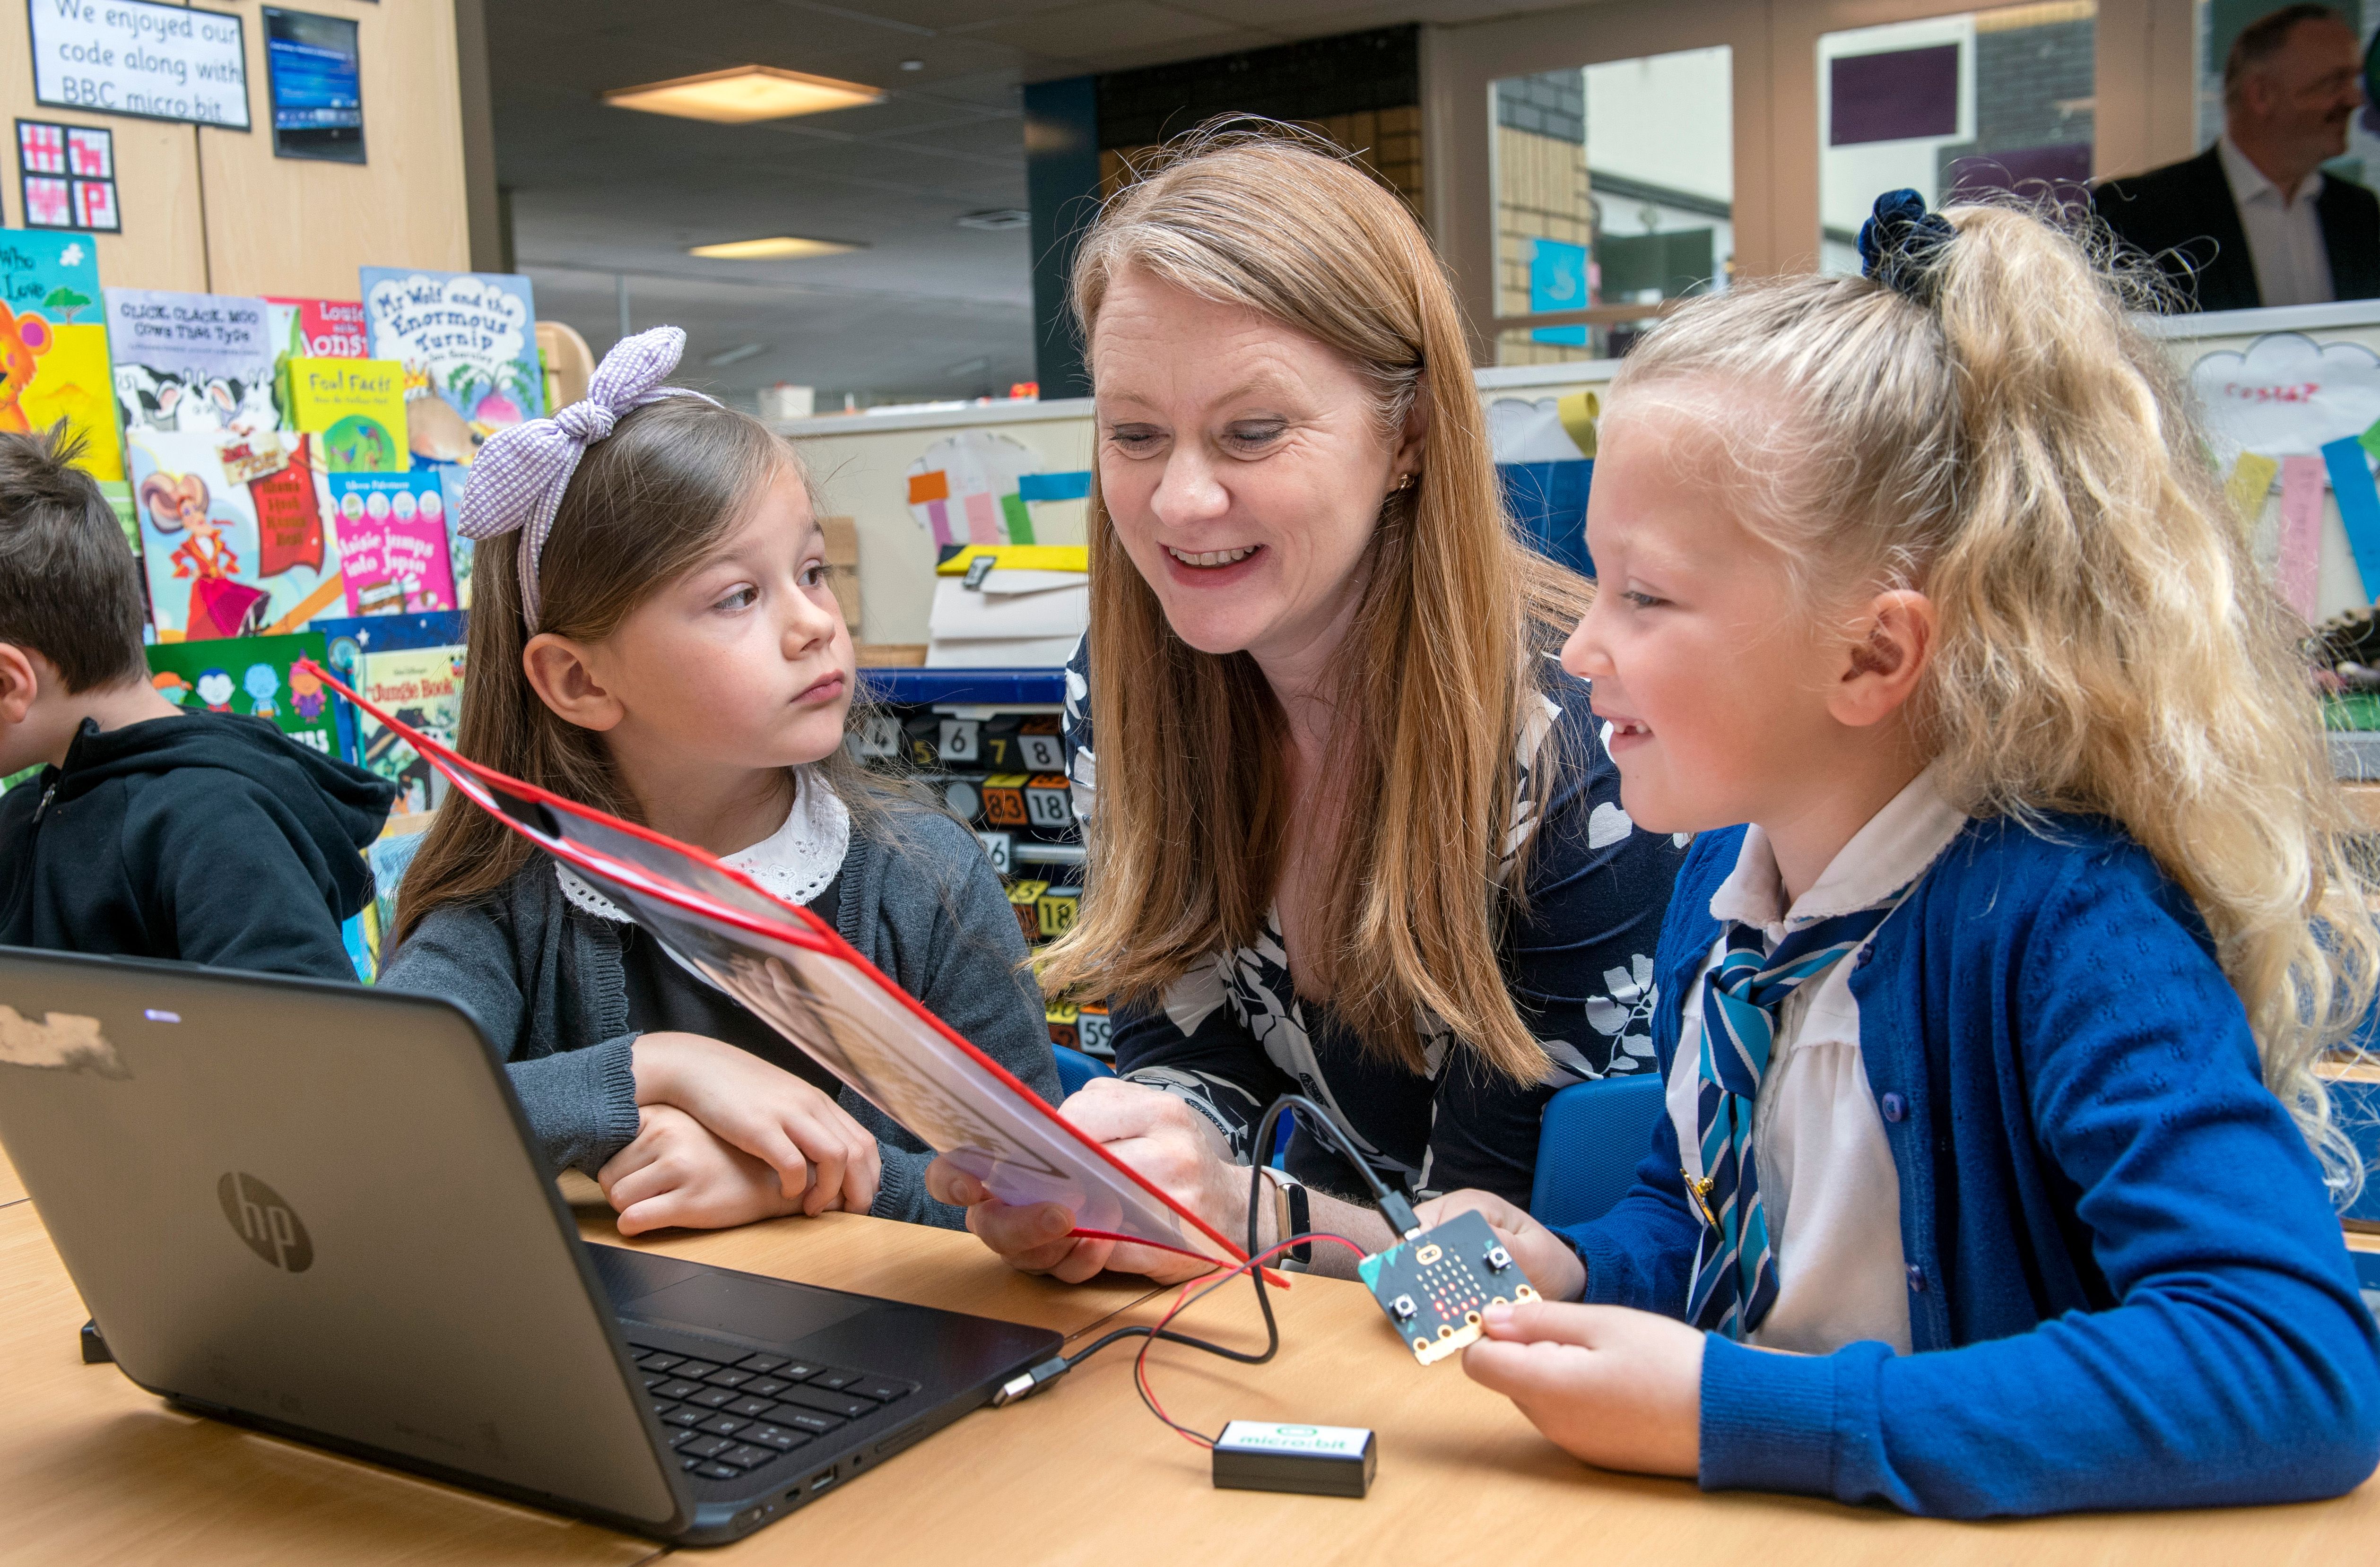 Scotland's Cabinet Secretary for Education and Skills, Shirley-Anne Somerville, meeting children at Methilhill Primary School 